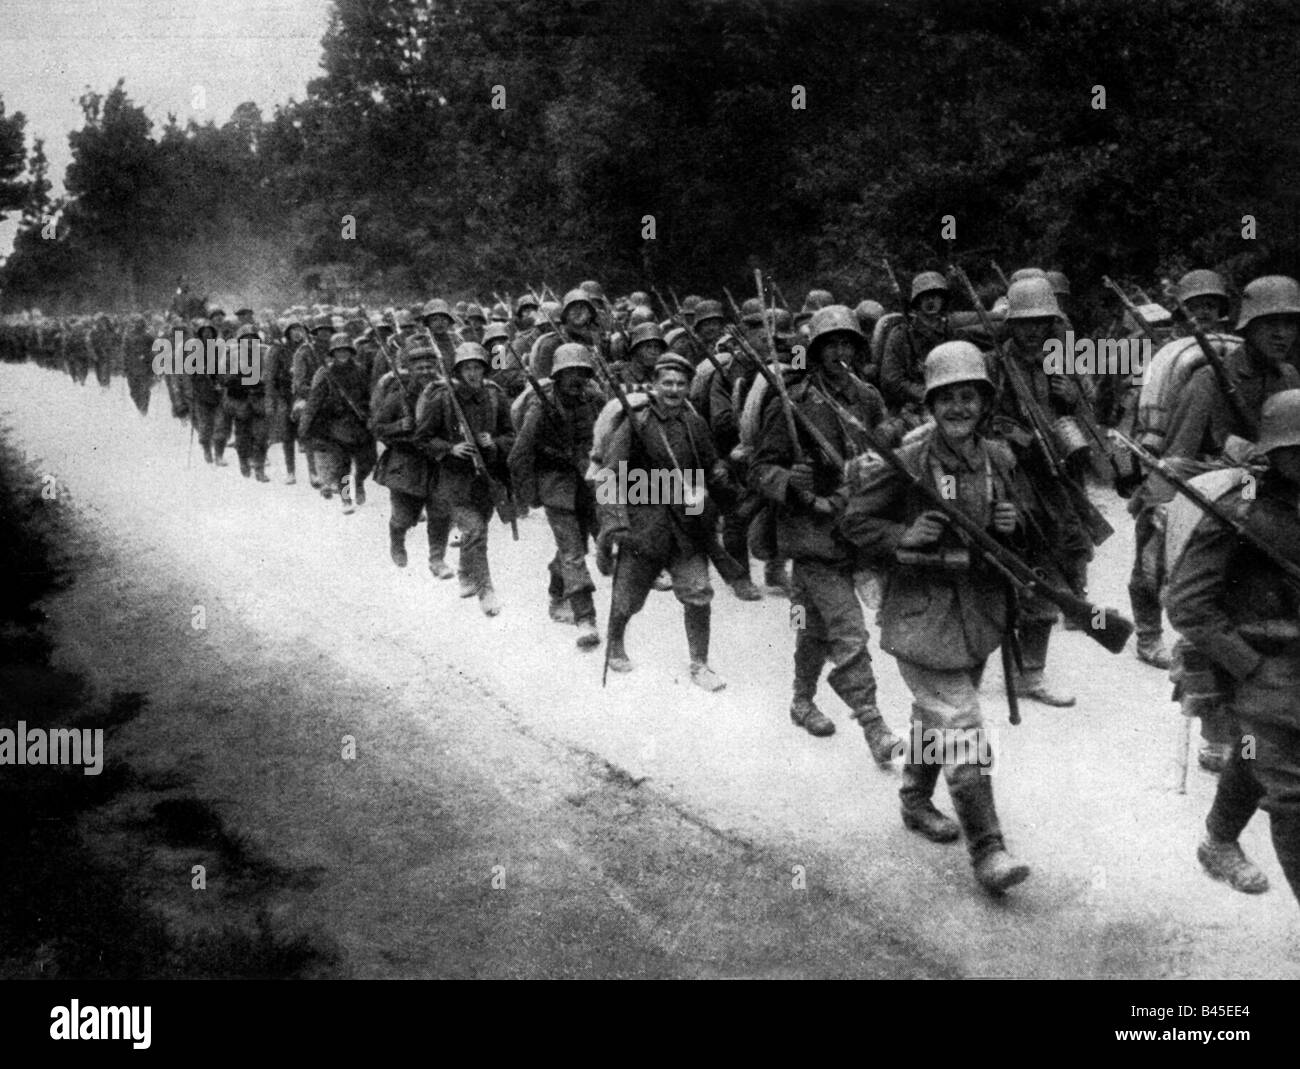 events, First World War / WWI, Western Front, Battle of Verdun 1916, German reserve troops on the way to the front, summer 1916, France, soldiers, marching, column, steel helmet, rifles, march, 20th century historic, historical, people, 1910s, Stock Photo